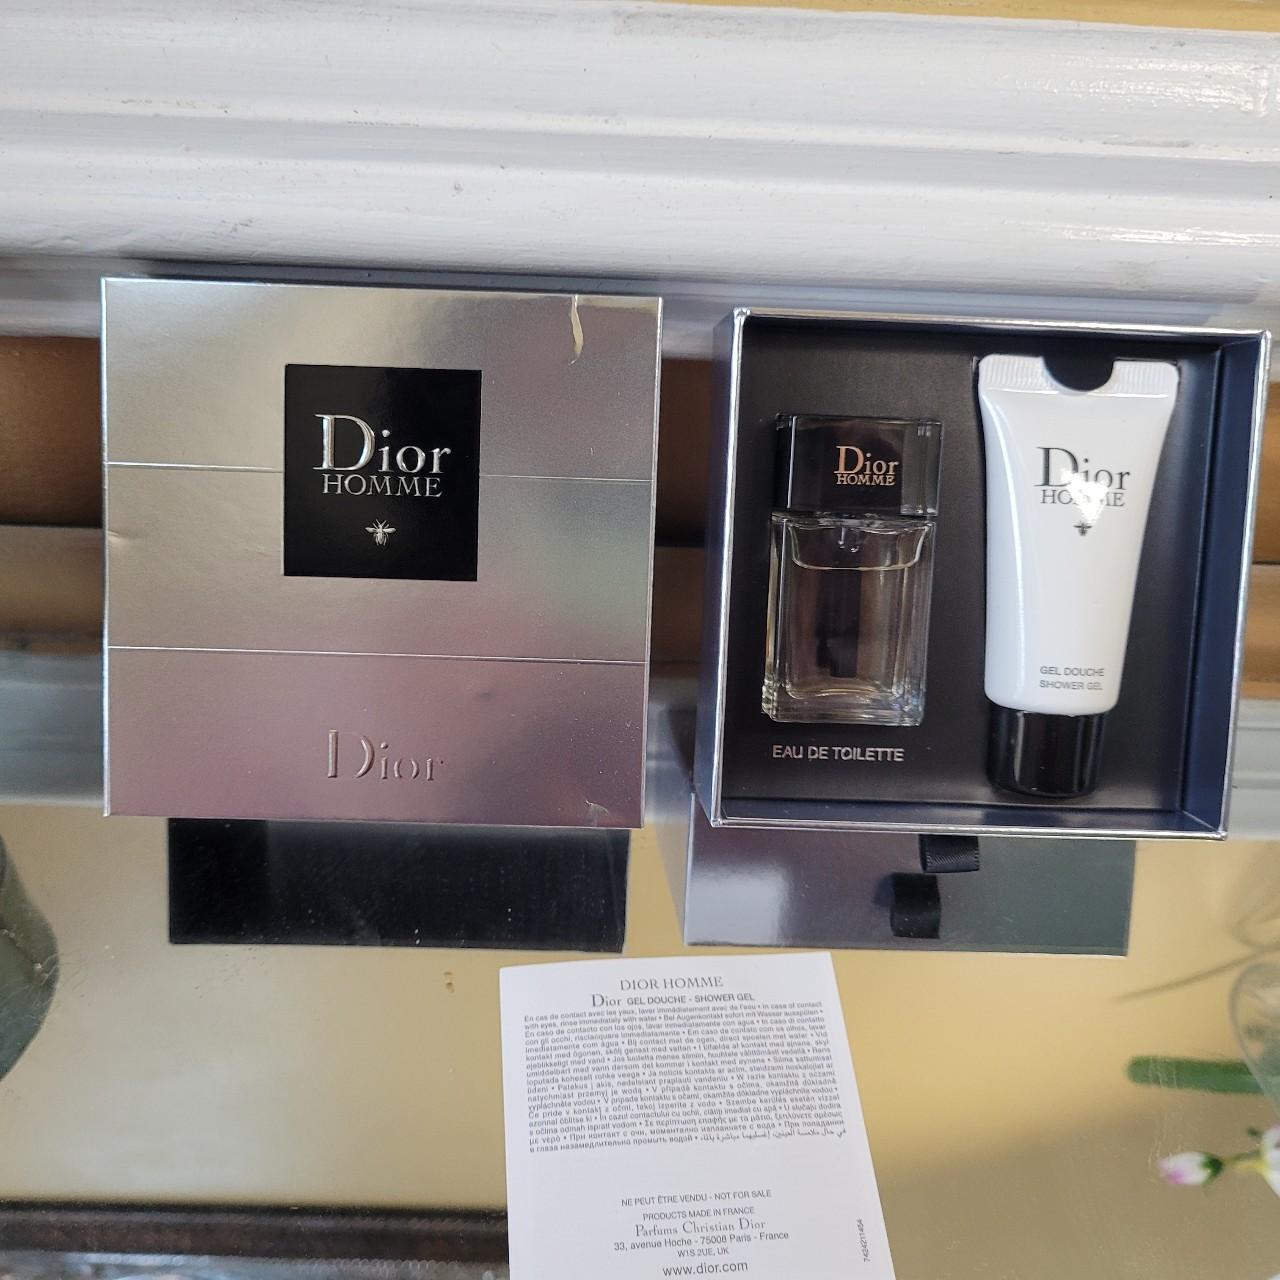 Product Image 1 - Dior homme gift set brand